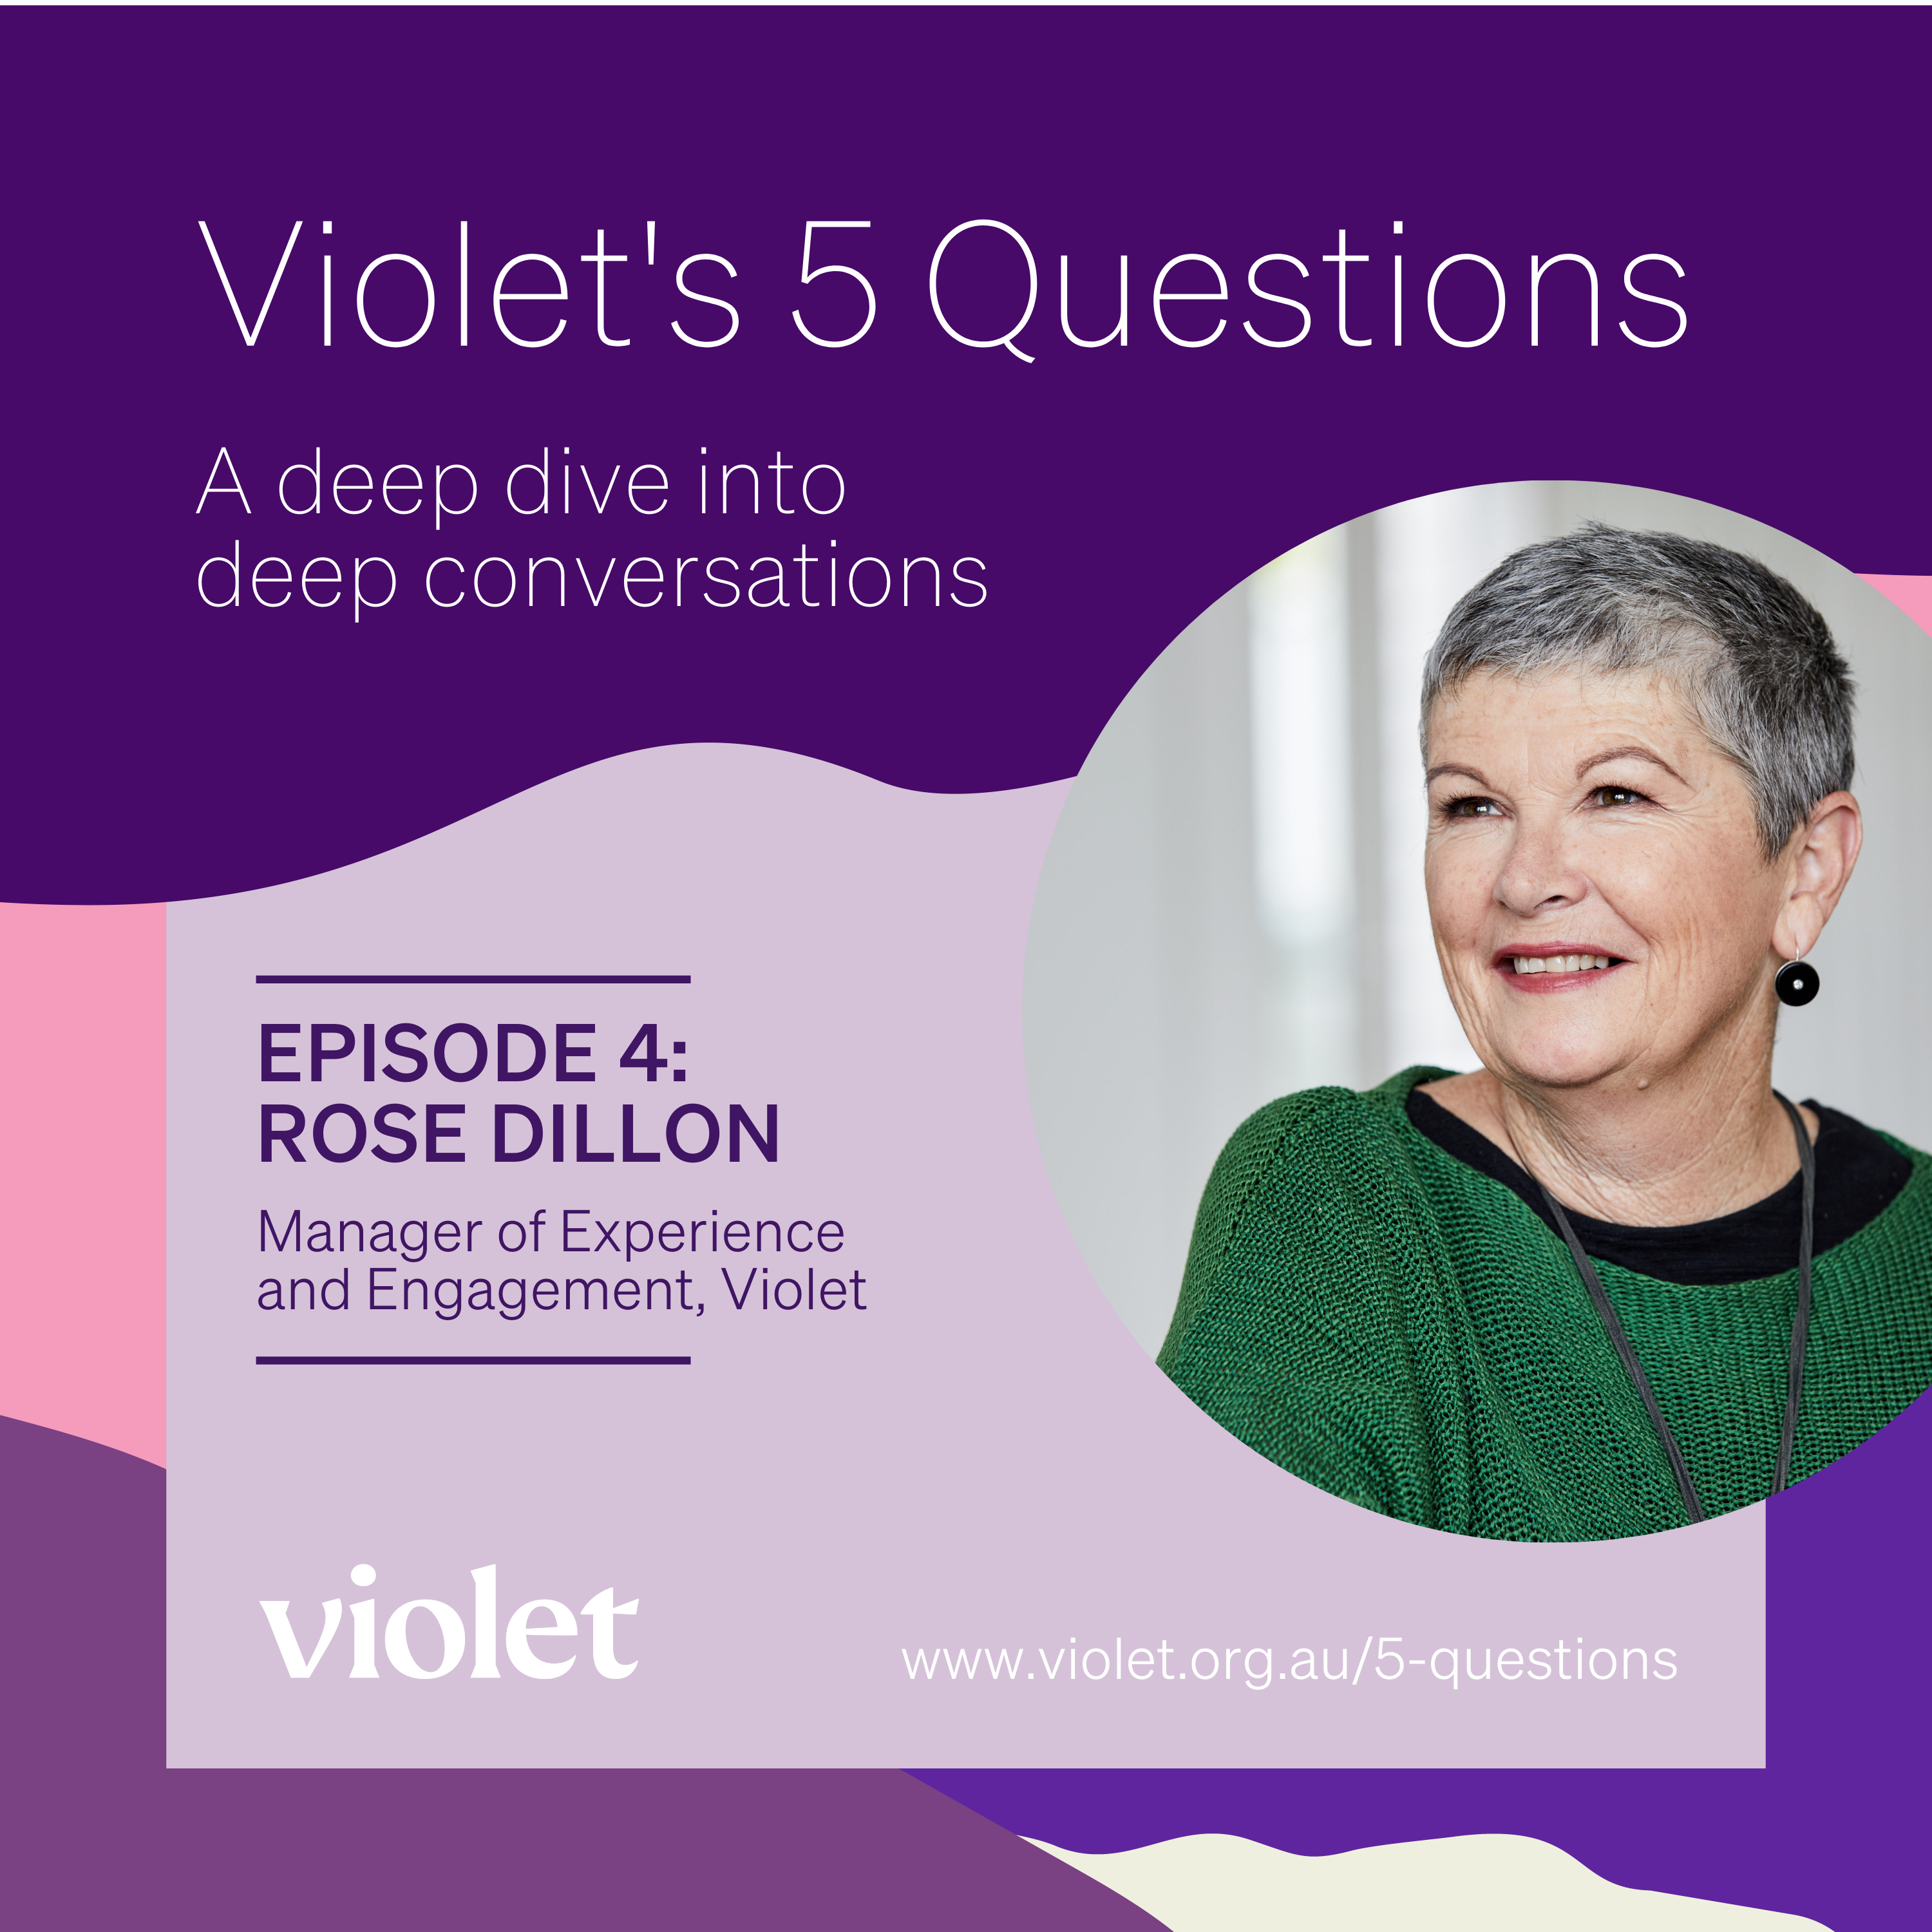 Rose Dillon | Manager of Experience and Engagement, Violet